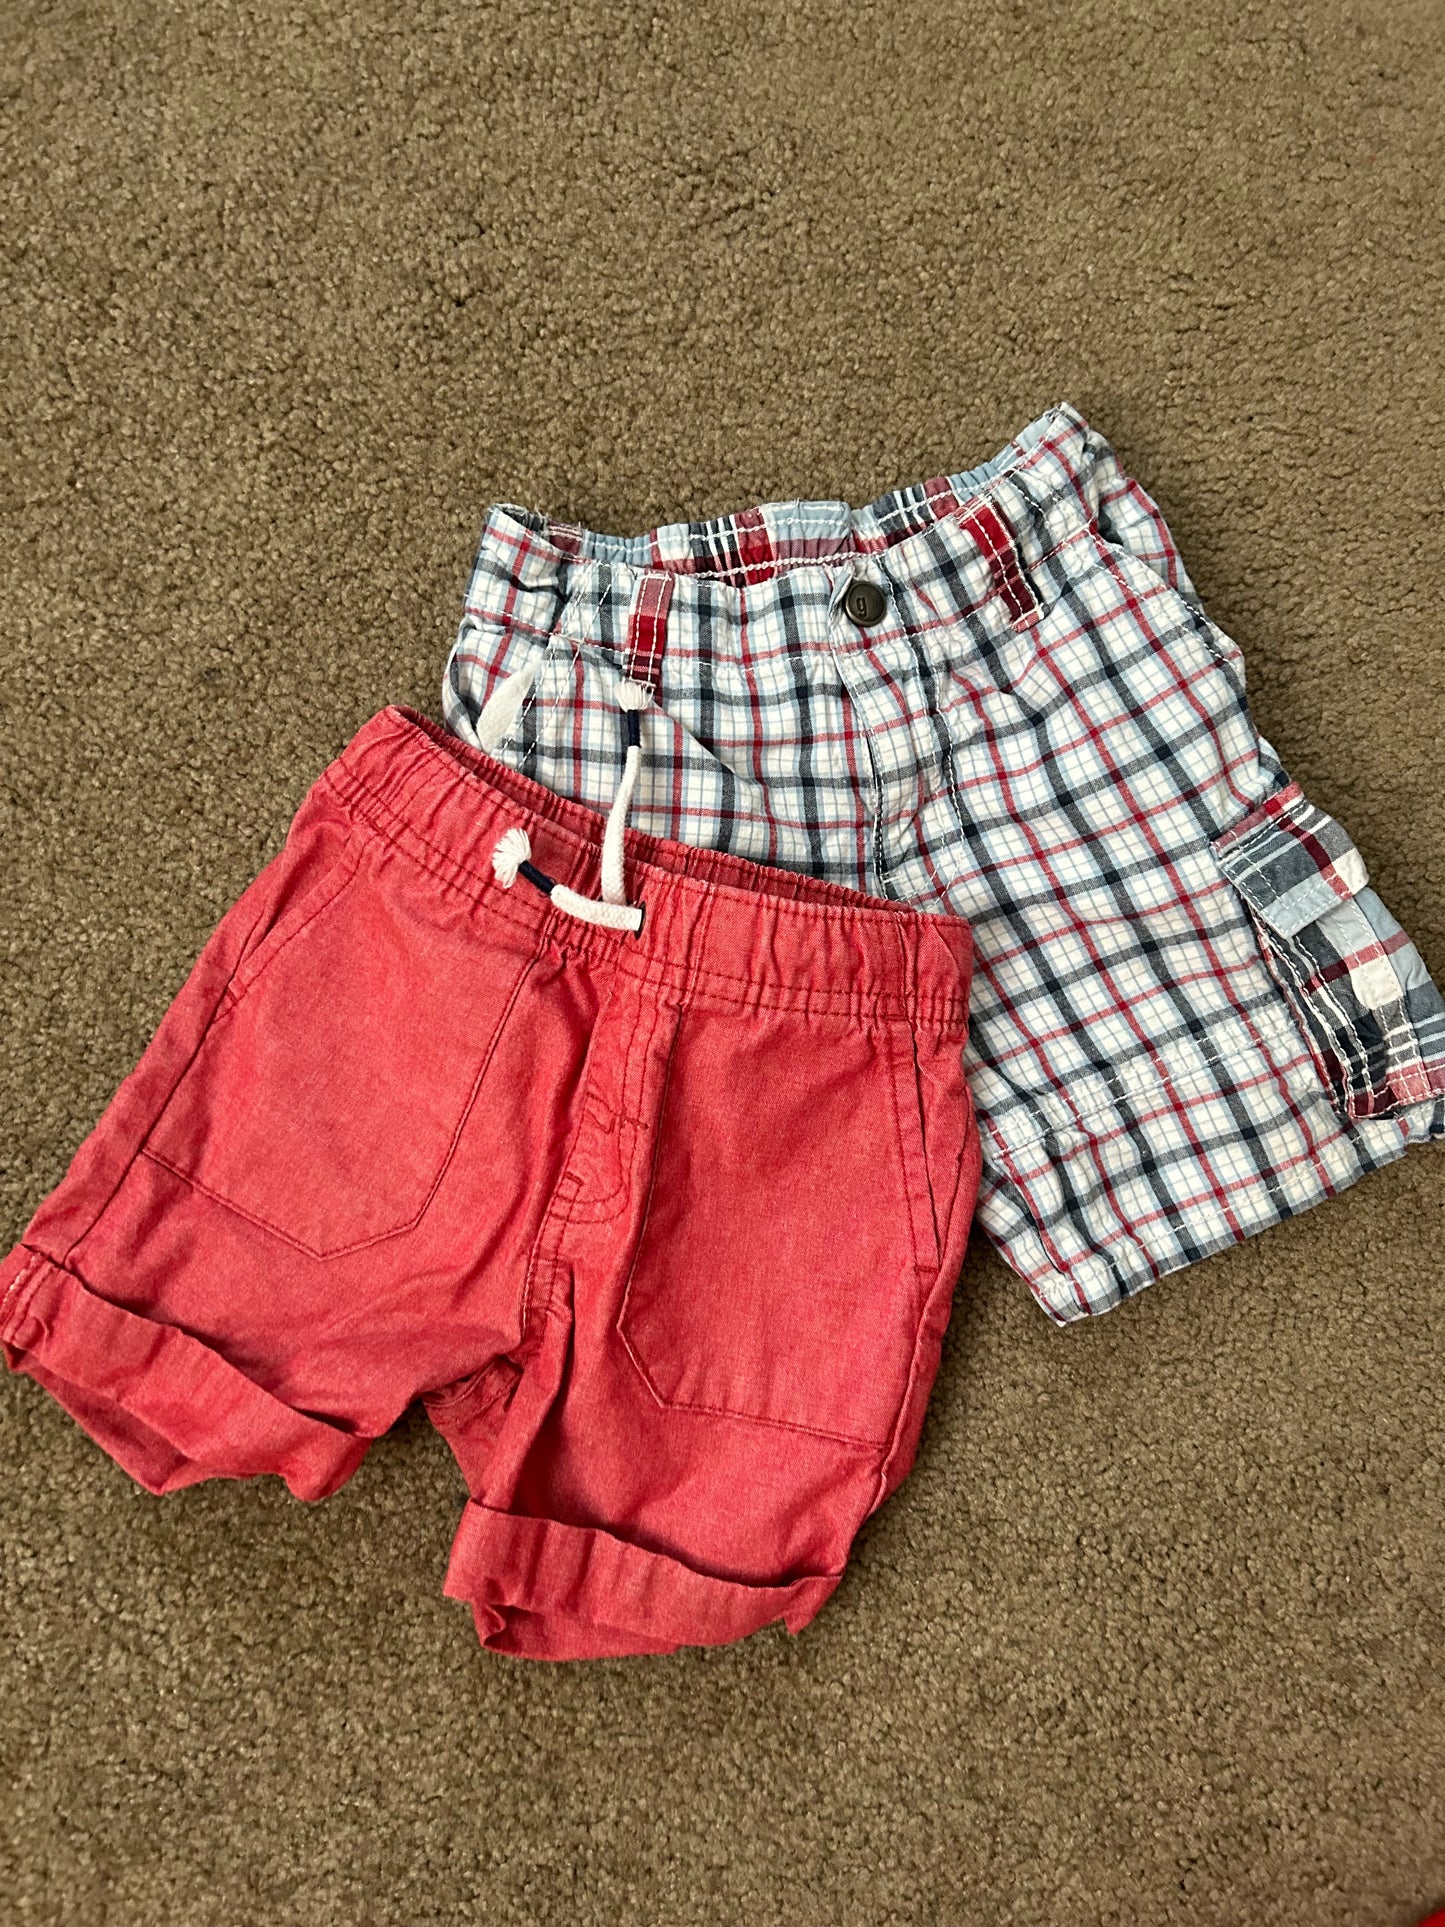 Boys Shorts -2 pair - Red (Cat and Jack) Navy/Red Plaid (Gymboree) 12-18 months